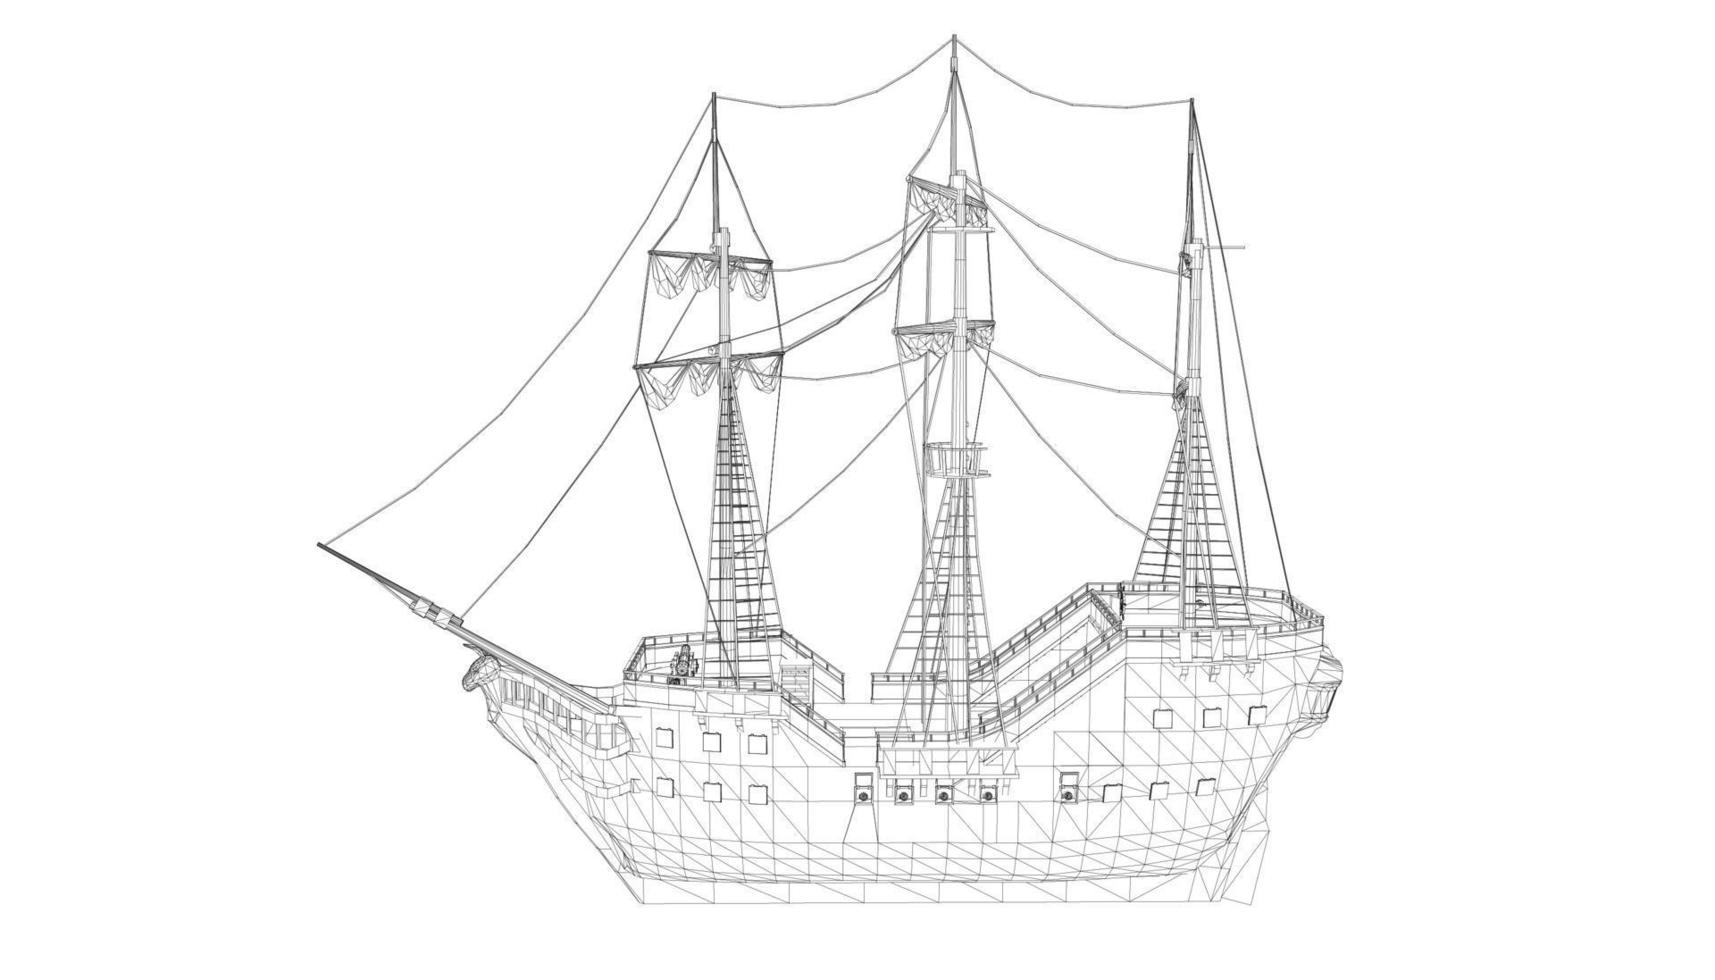 lineart style classic sailboat vector